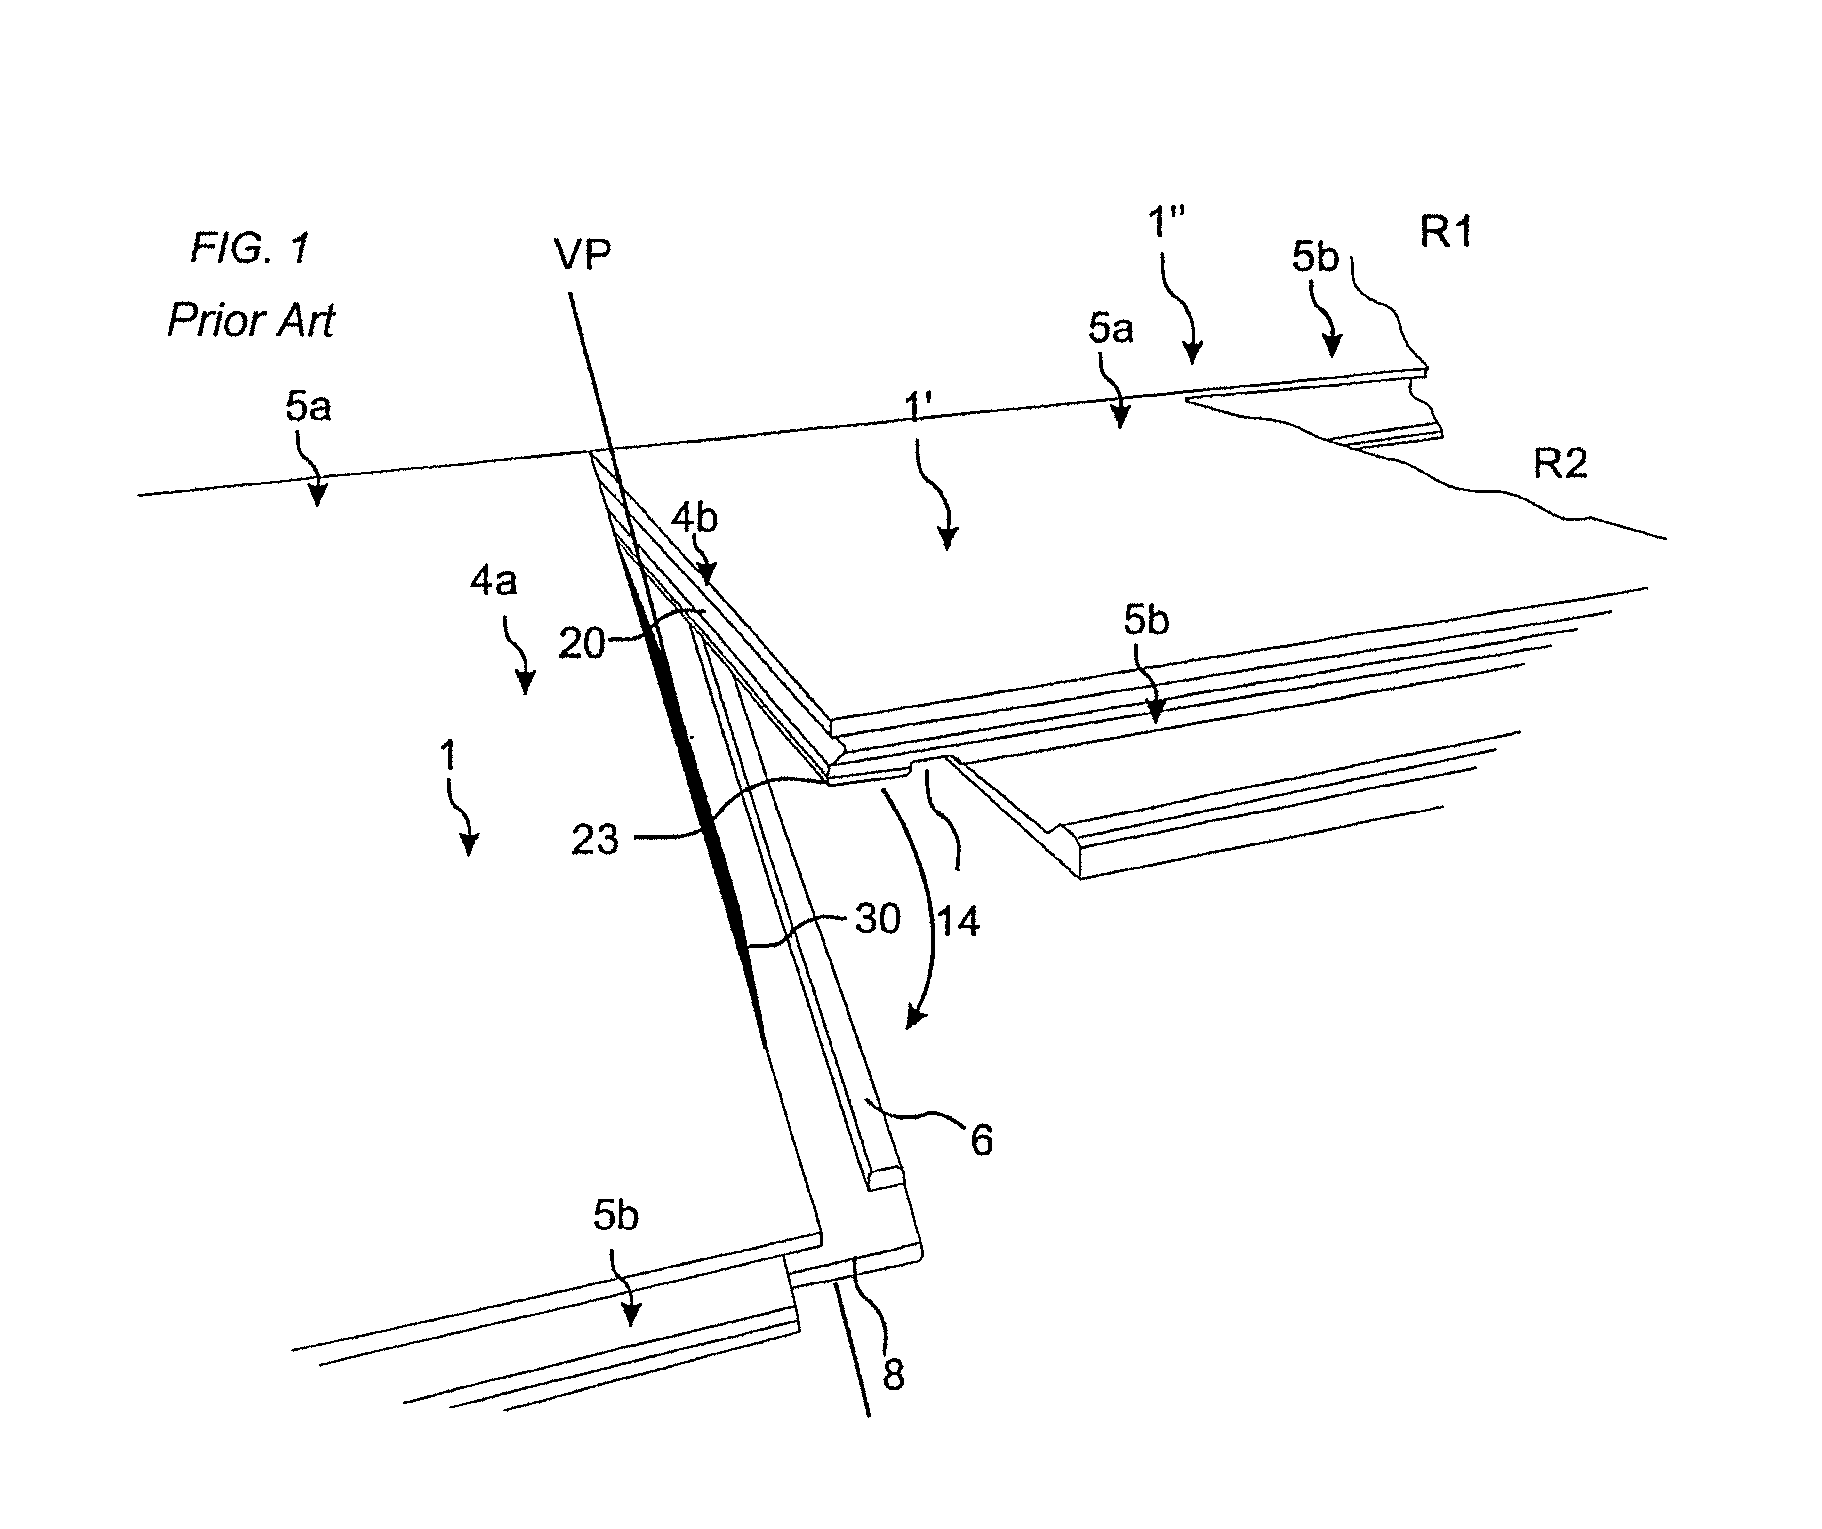 Method for producing a mechanical locking system for building panels